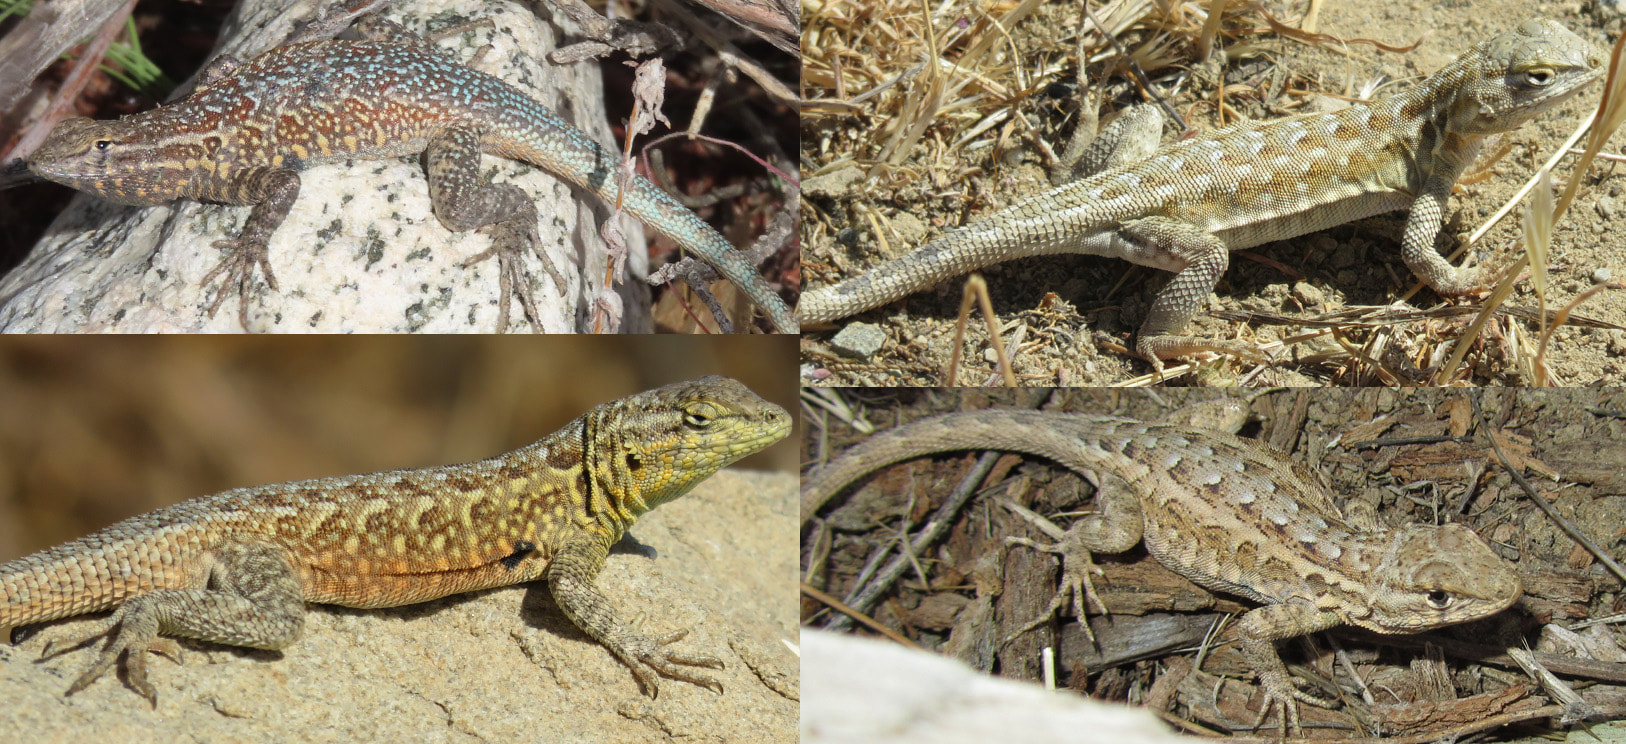 Common Side-Blotched Lizards